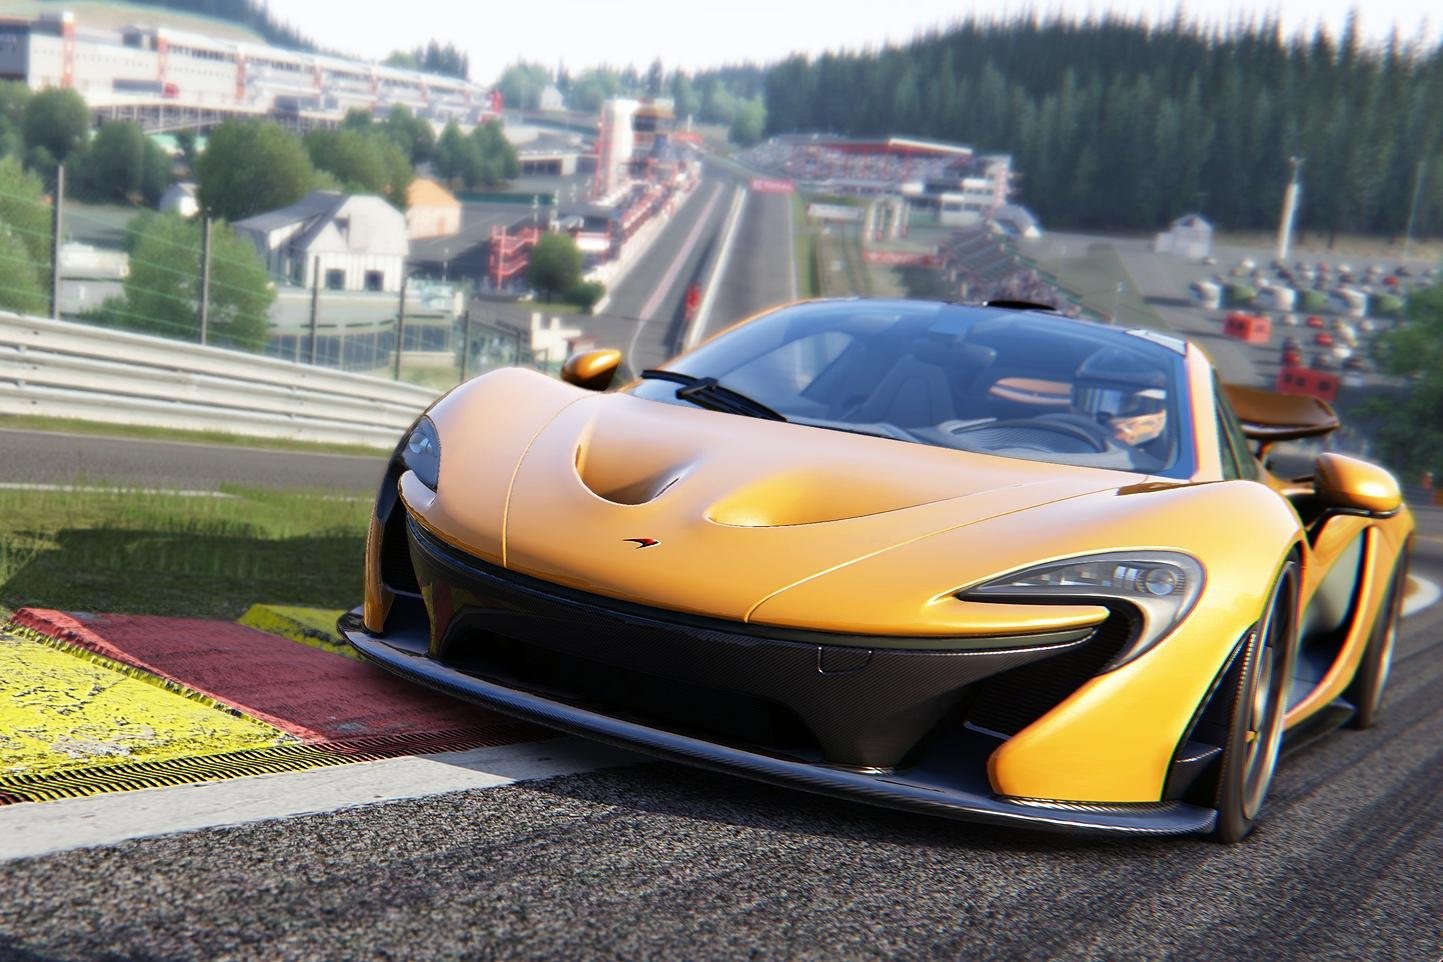 Ultimate racing sim: Assetto Corsa preview